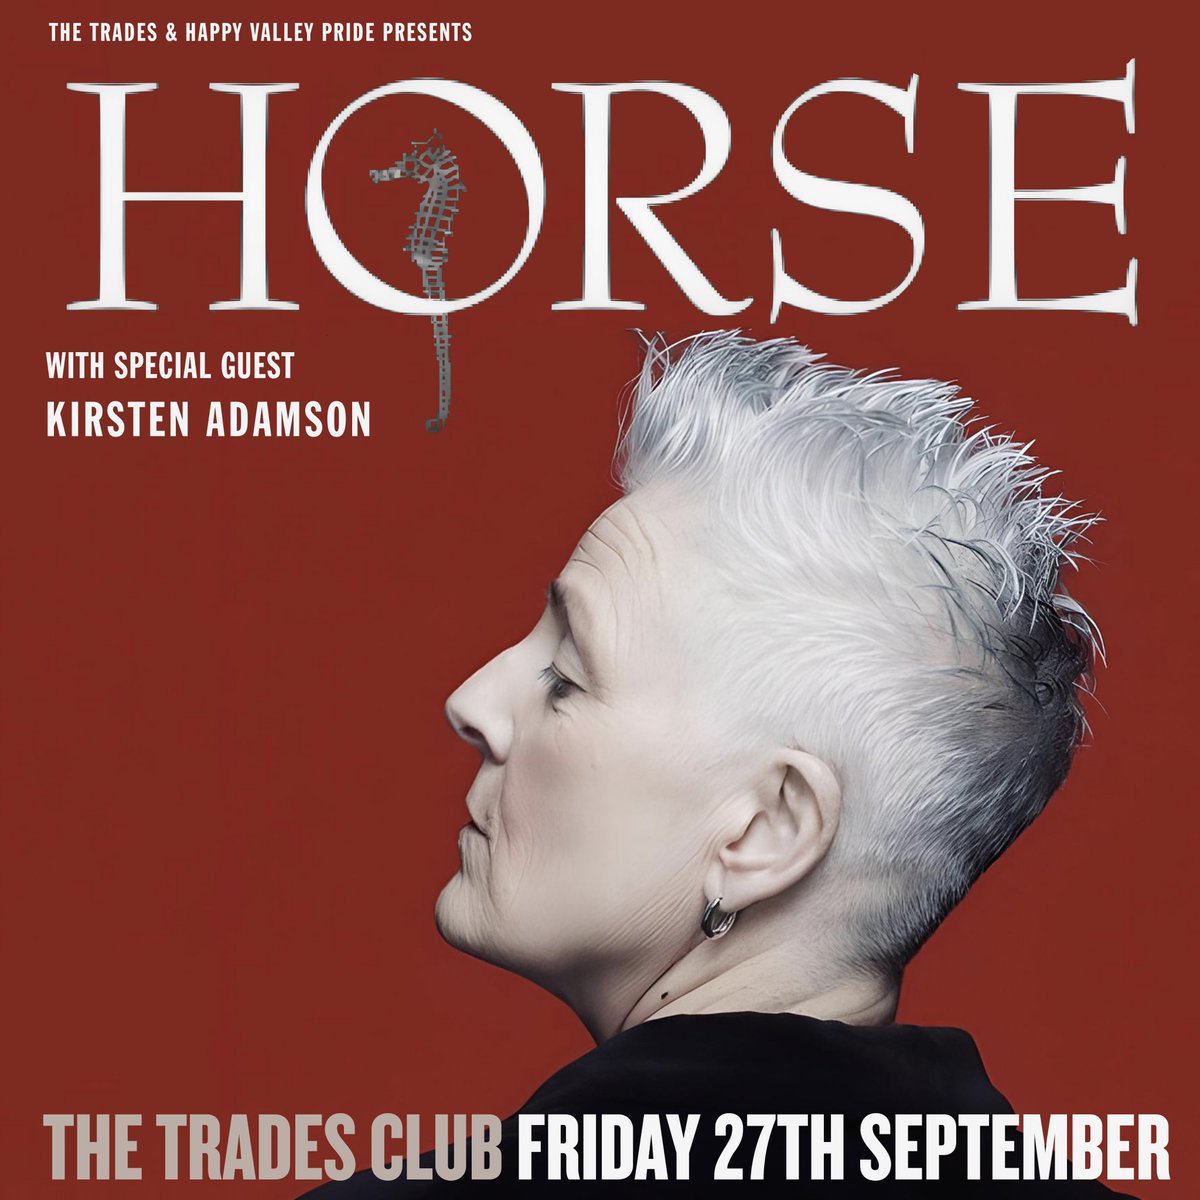 New show announcement: @appyvalleypride and the Trades present: iconic singer-songwriter @horsemusic here at @thetradesclub #hebdenbridge with special guest @kadamsonmusic on Fri 27th September. Tickets now on sale HERE >> thetradesclub.com/events/horse6